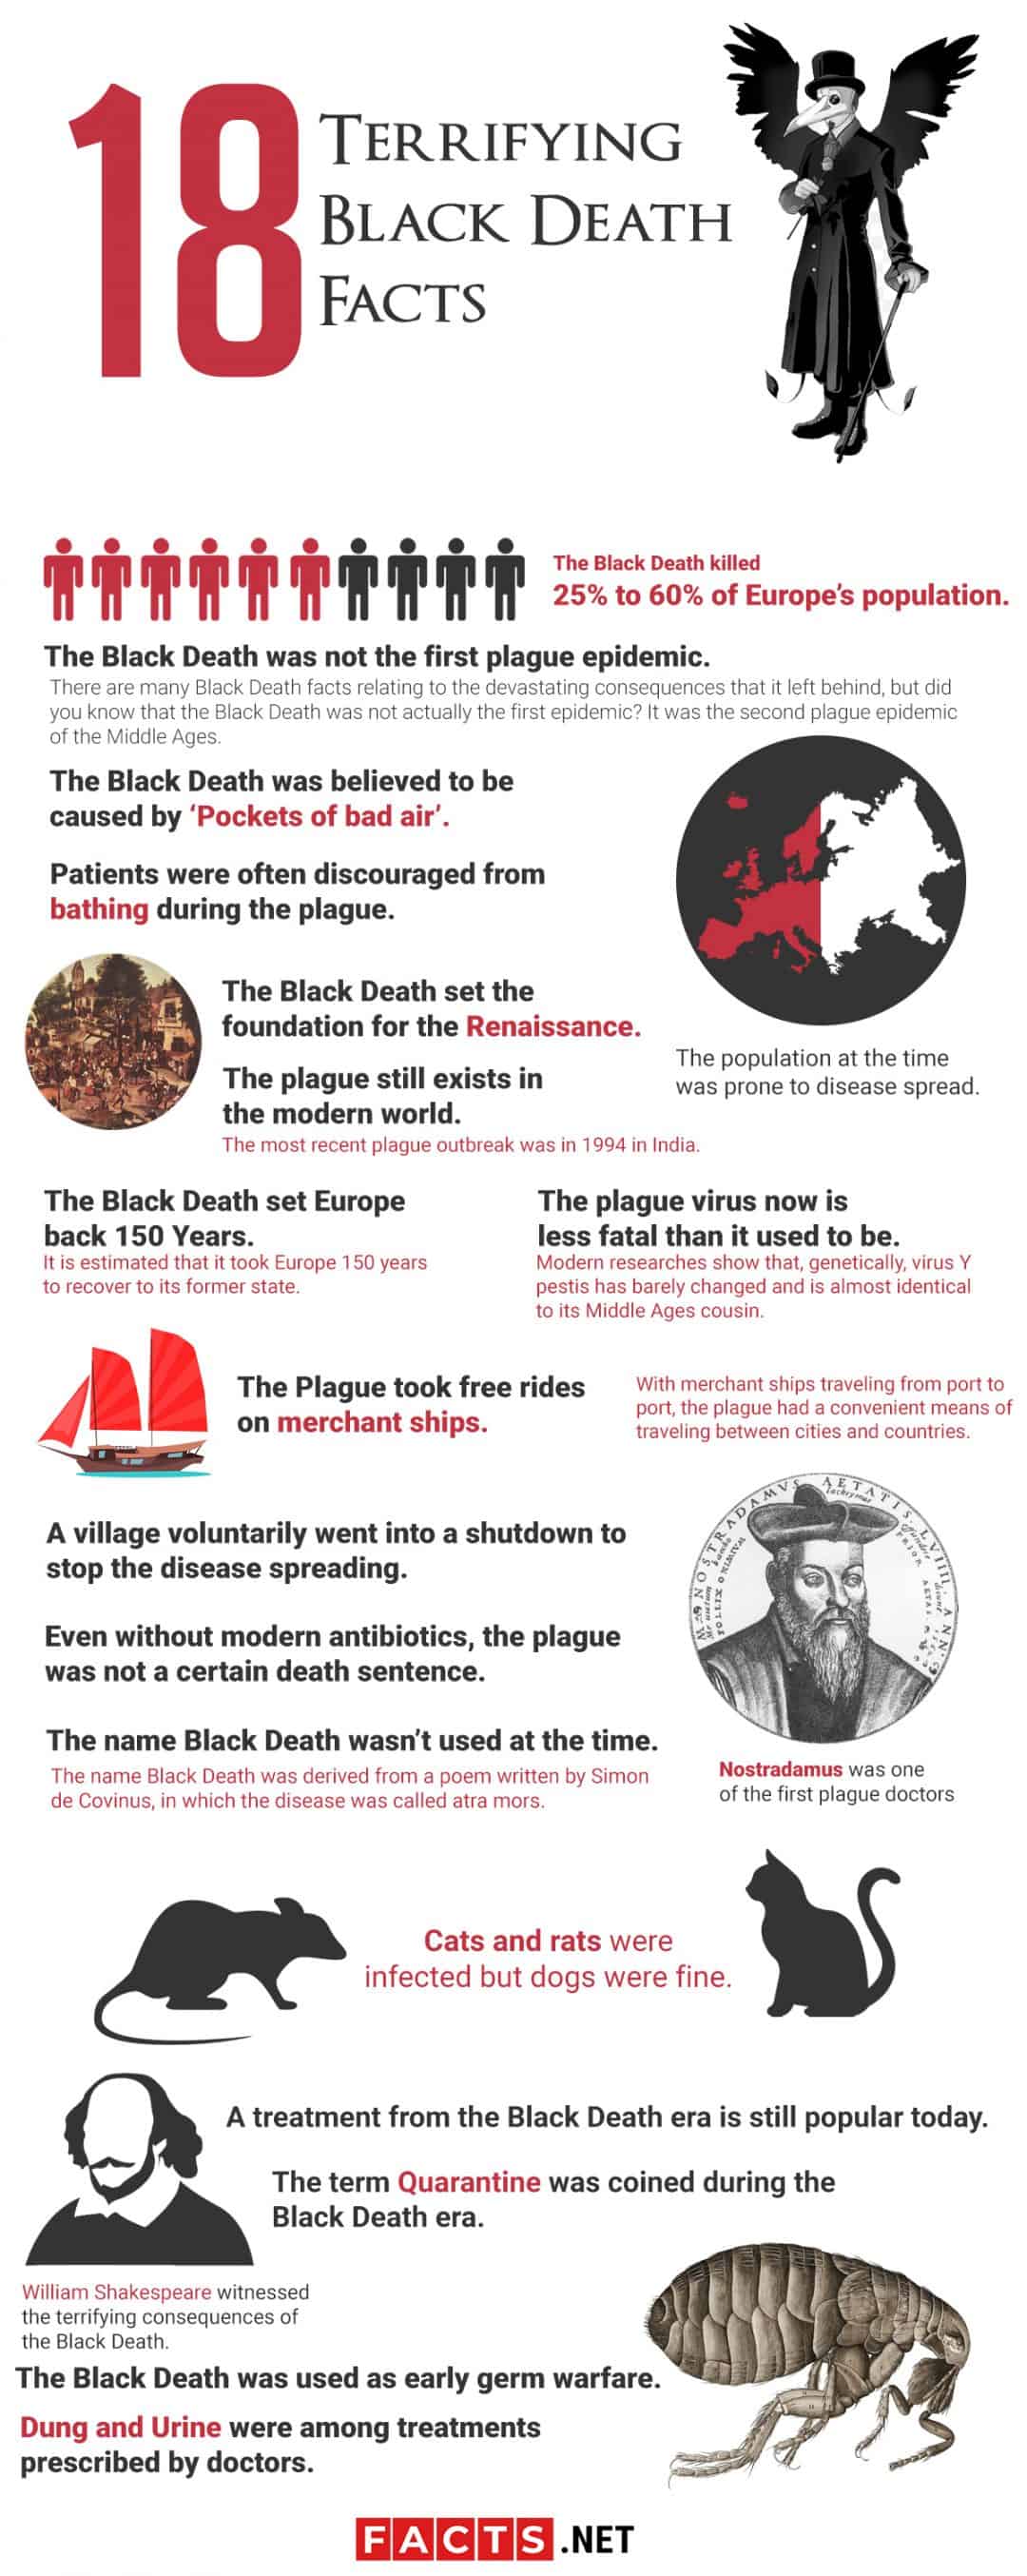 20 Black Death Facts That Will Shock You